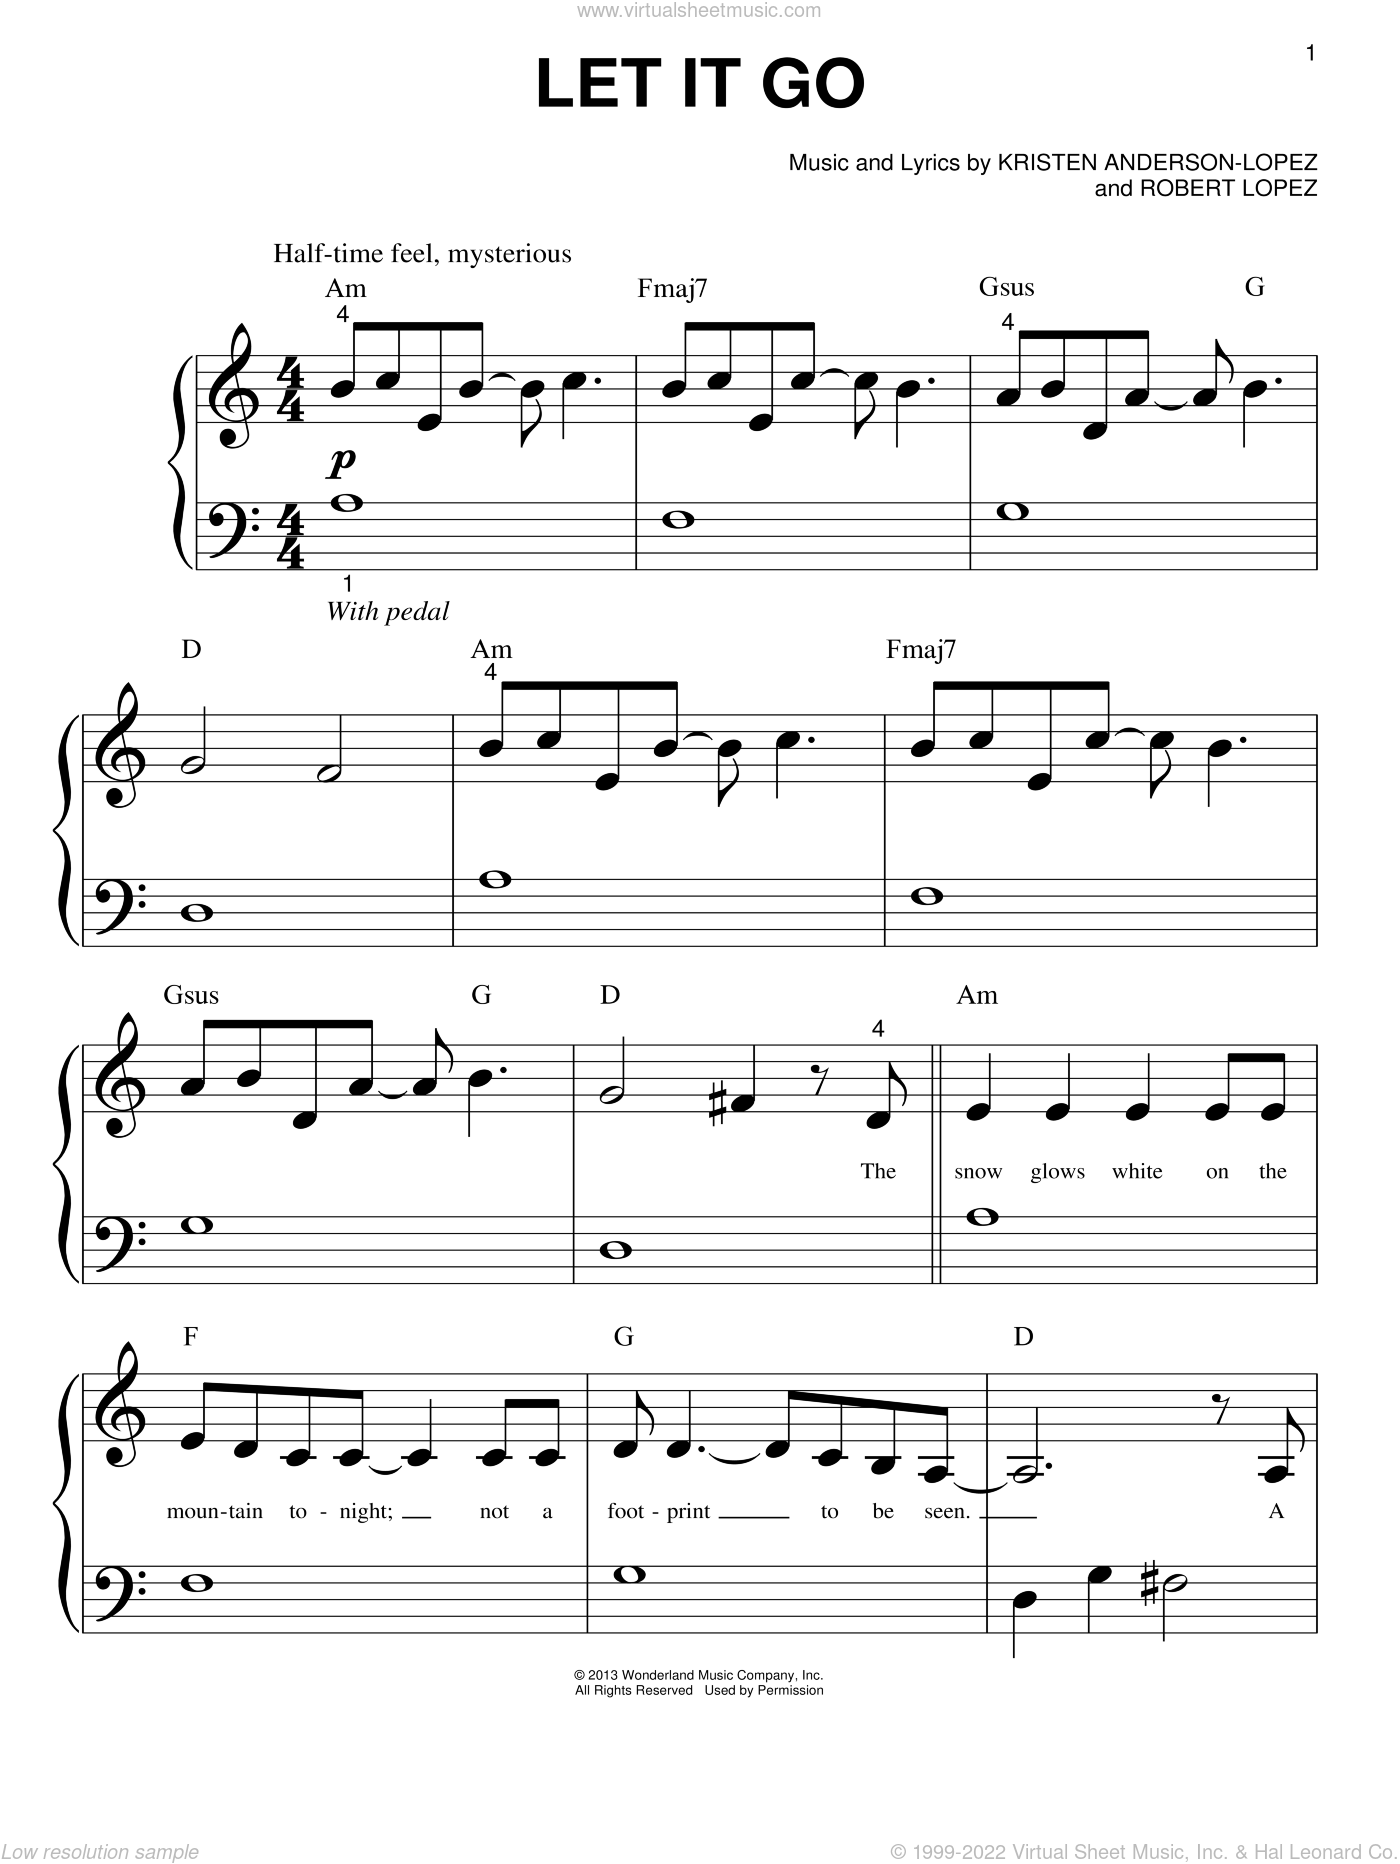 Lovato - Let It Go (from Frozen) sheet music for piano solo (big note book)